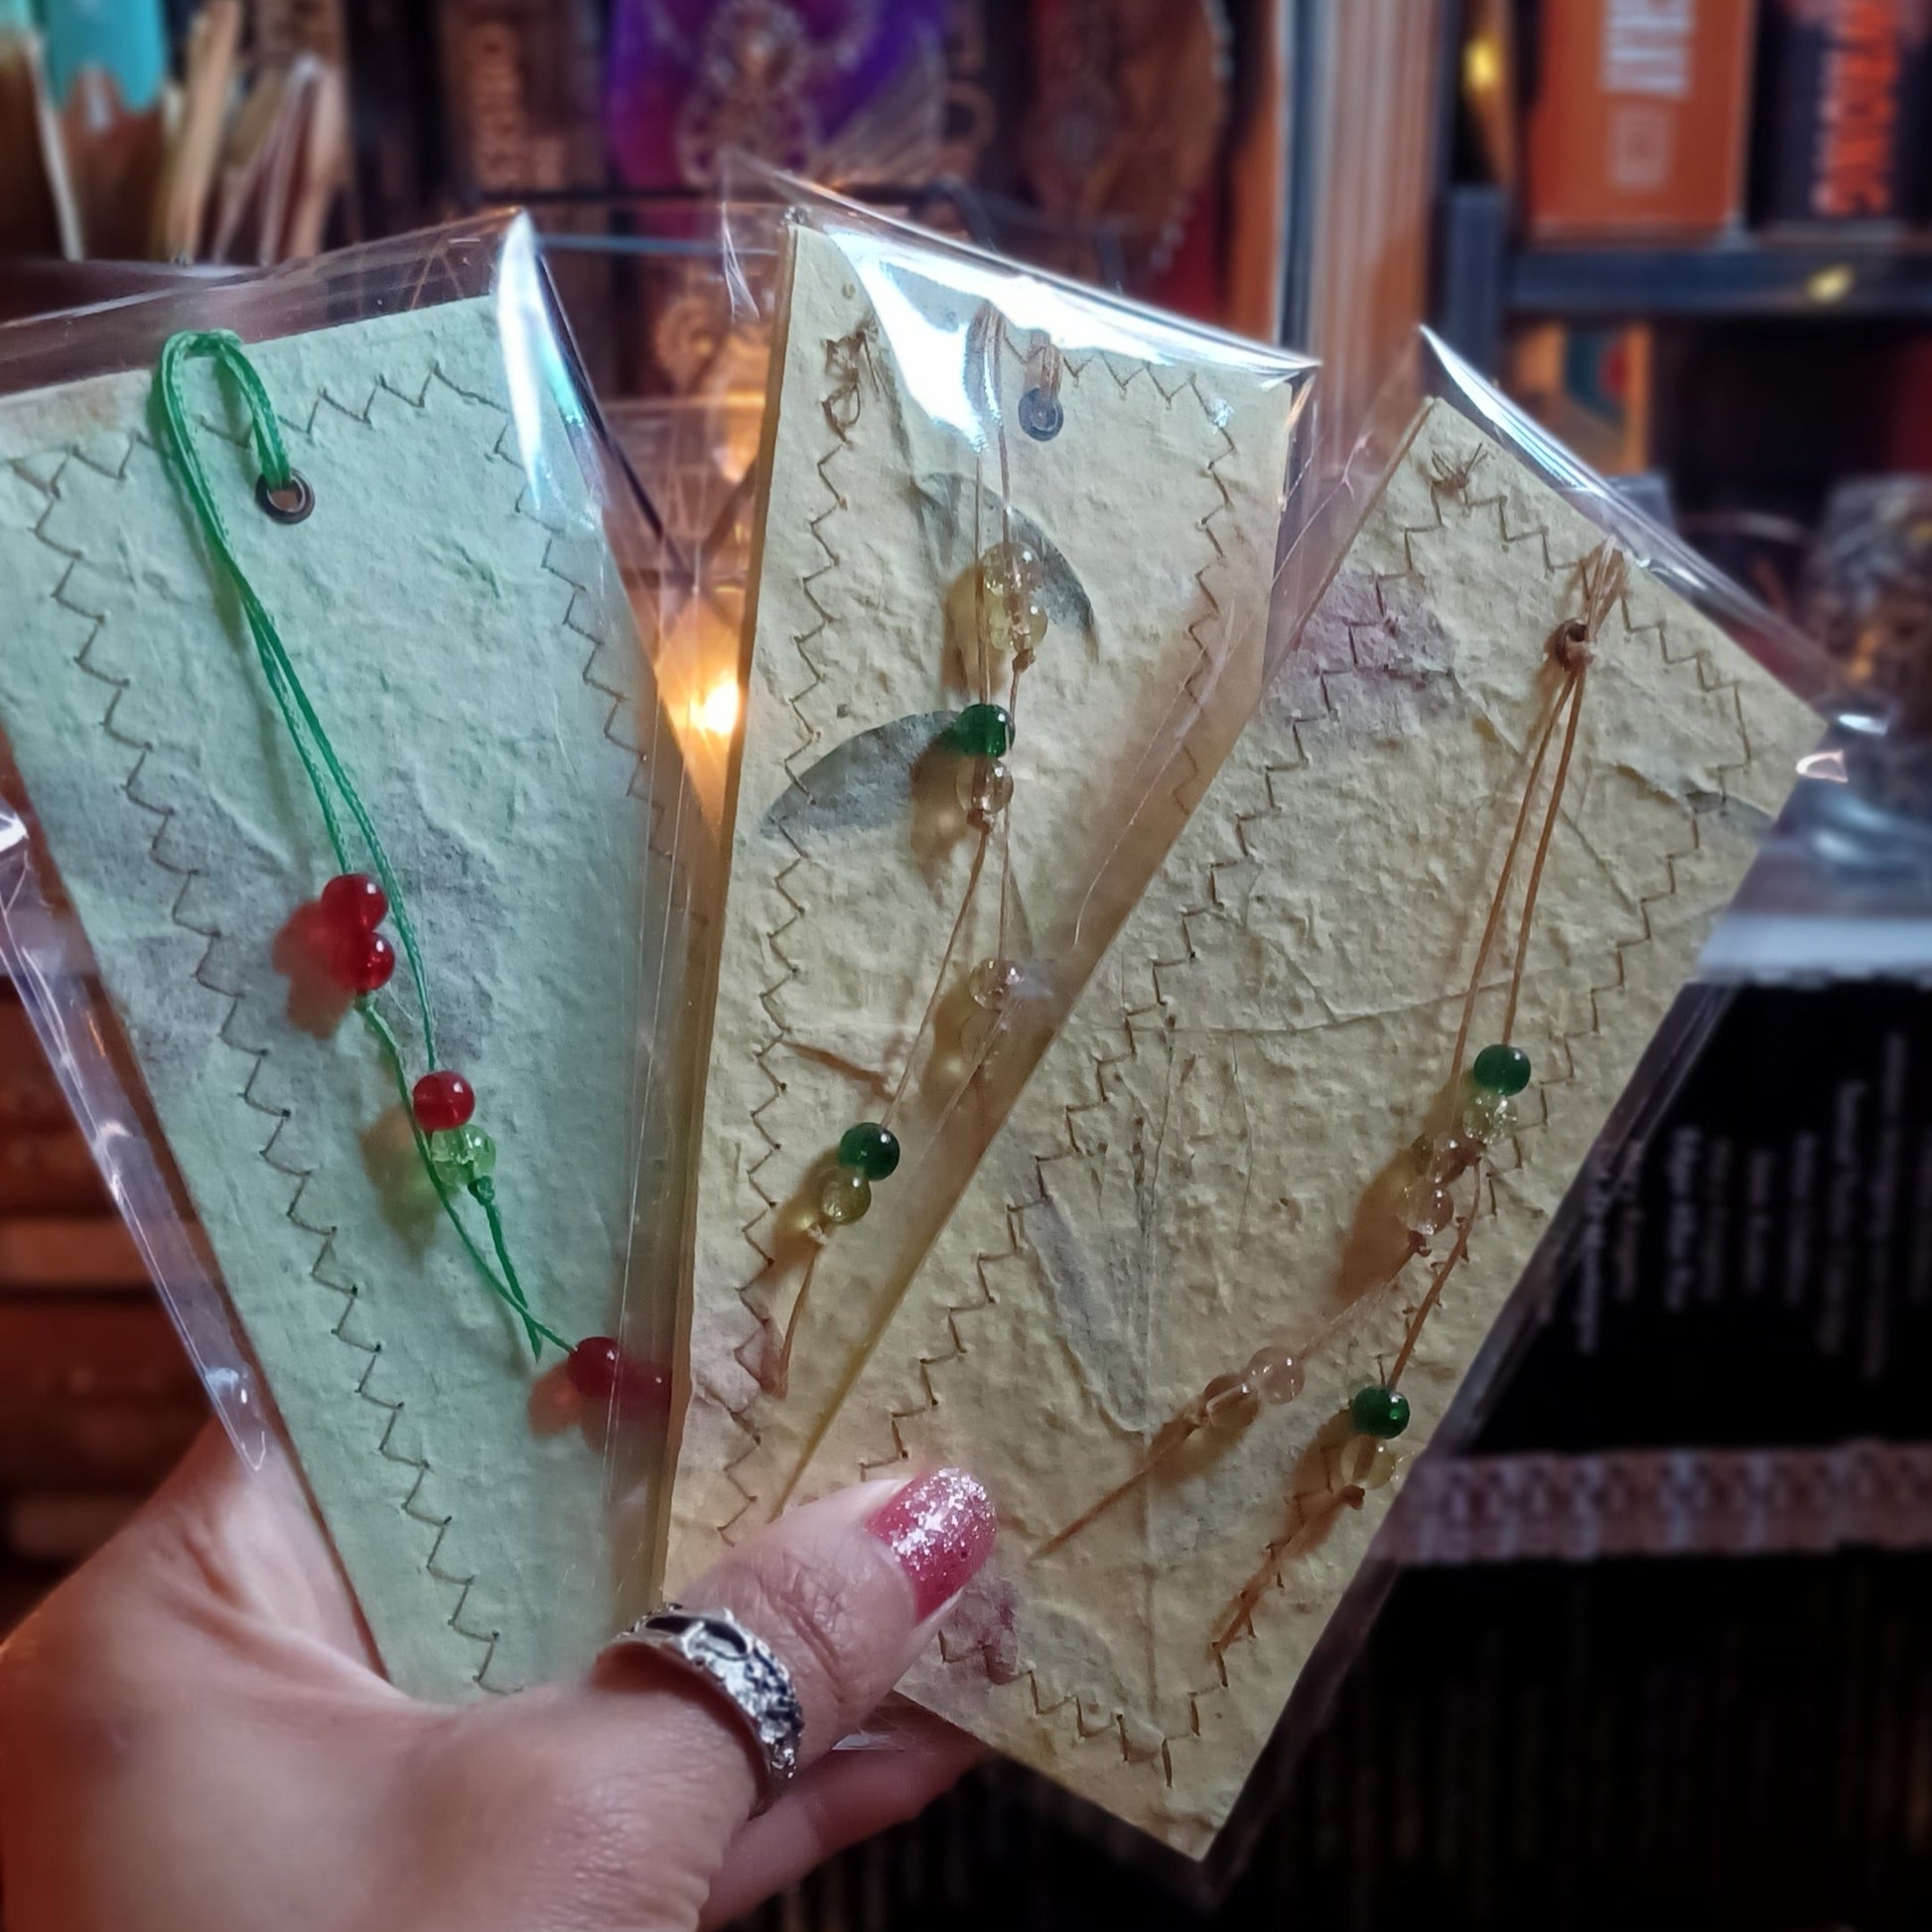 Green and yellow - Handmade Paper Bookmarks with Stitched Edges, Pressed Flowers and Leaves